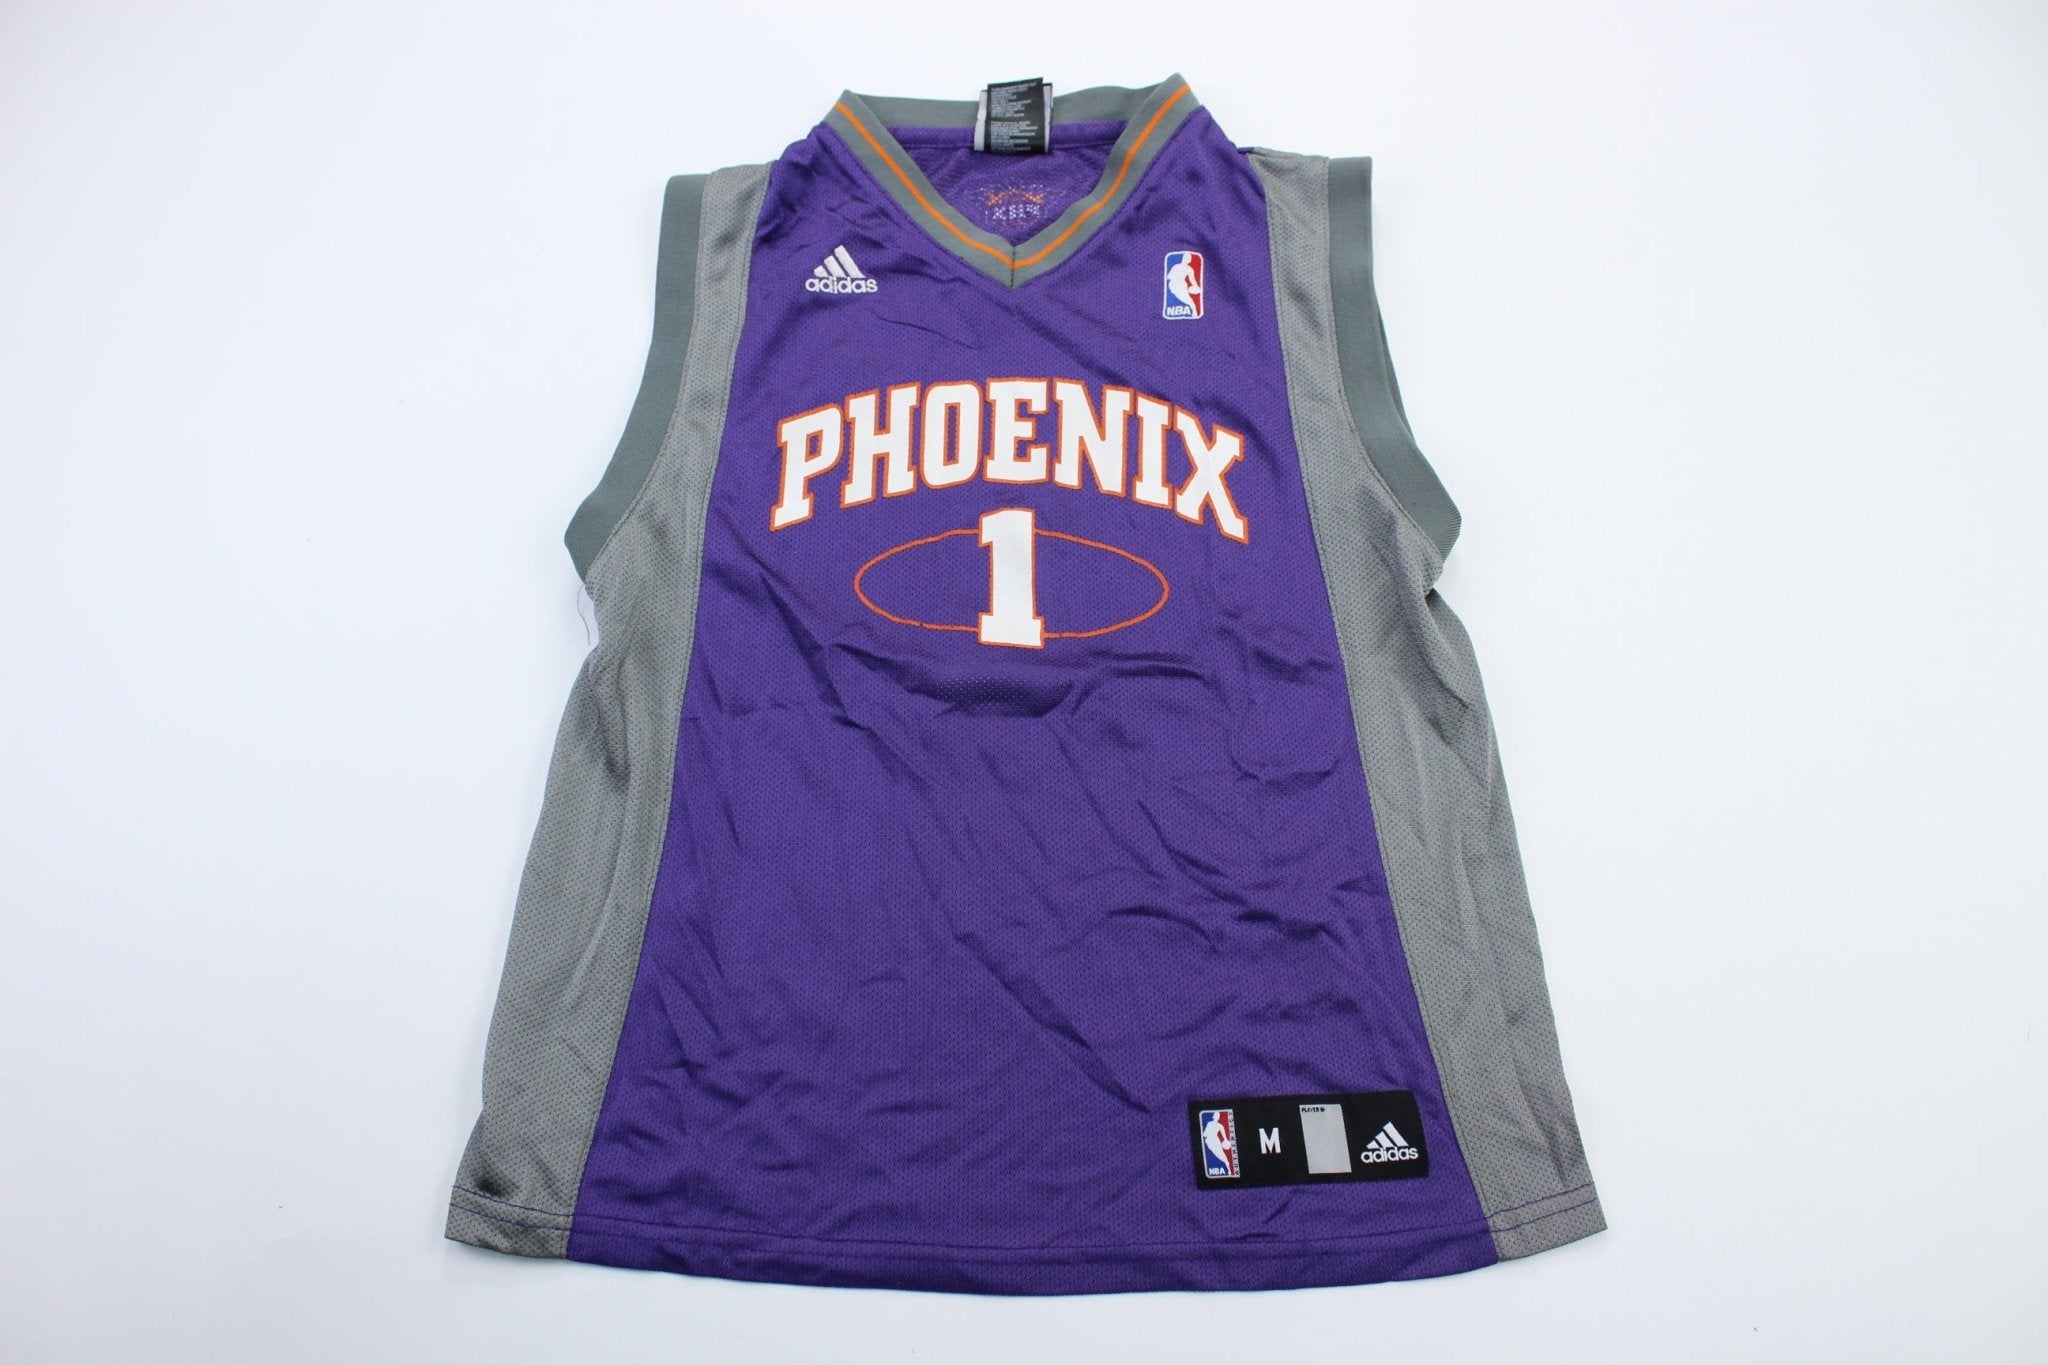 amare stoudemire suns jersey